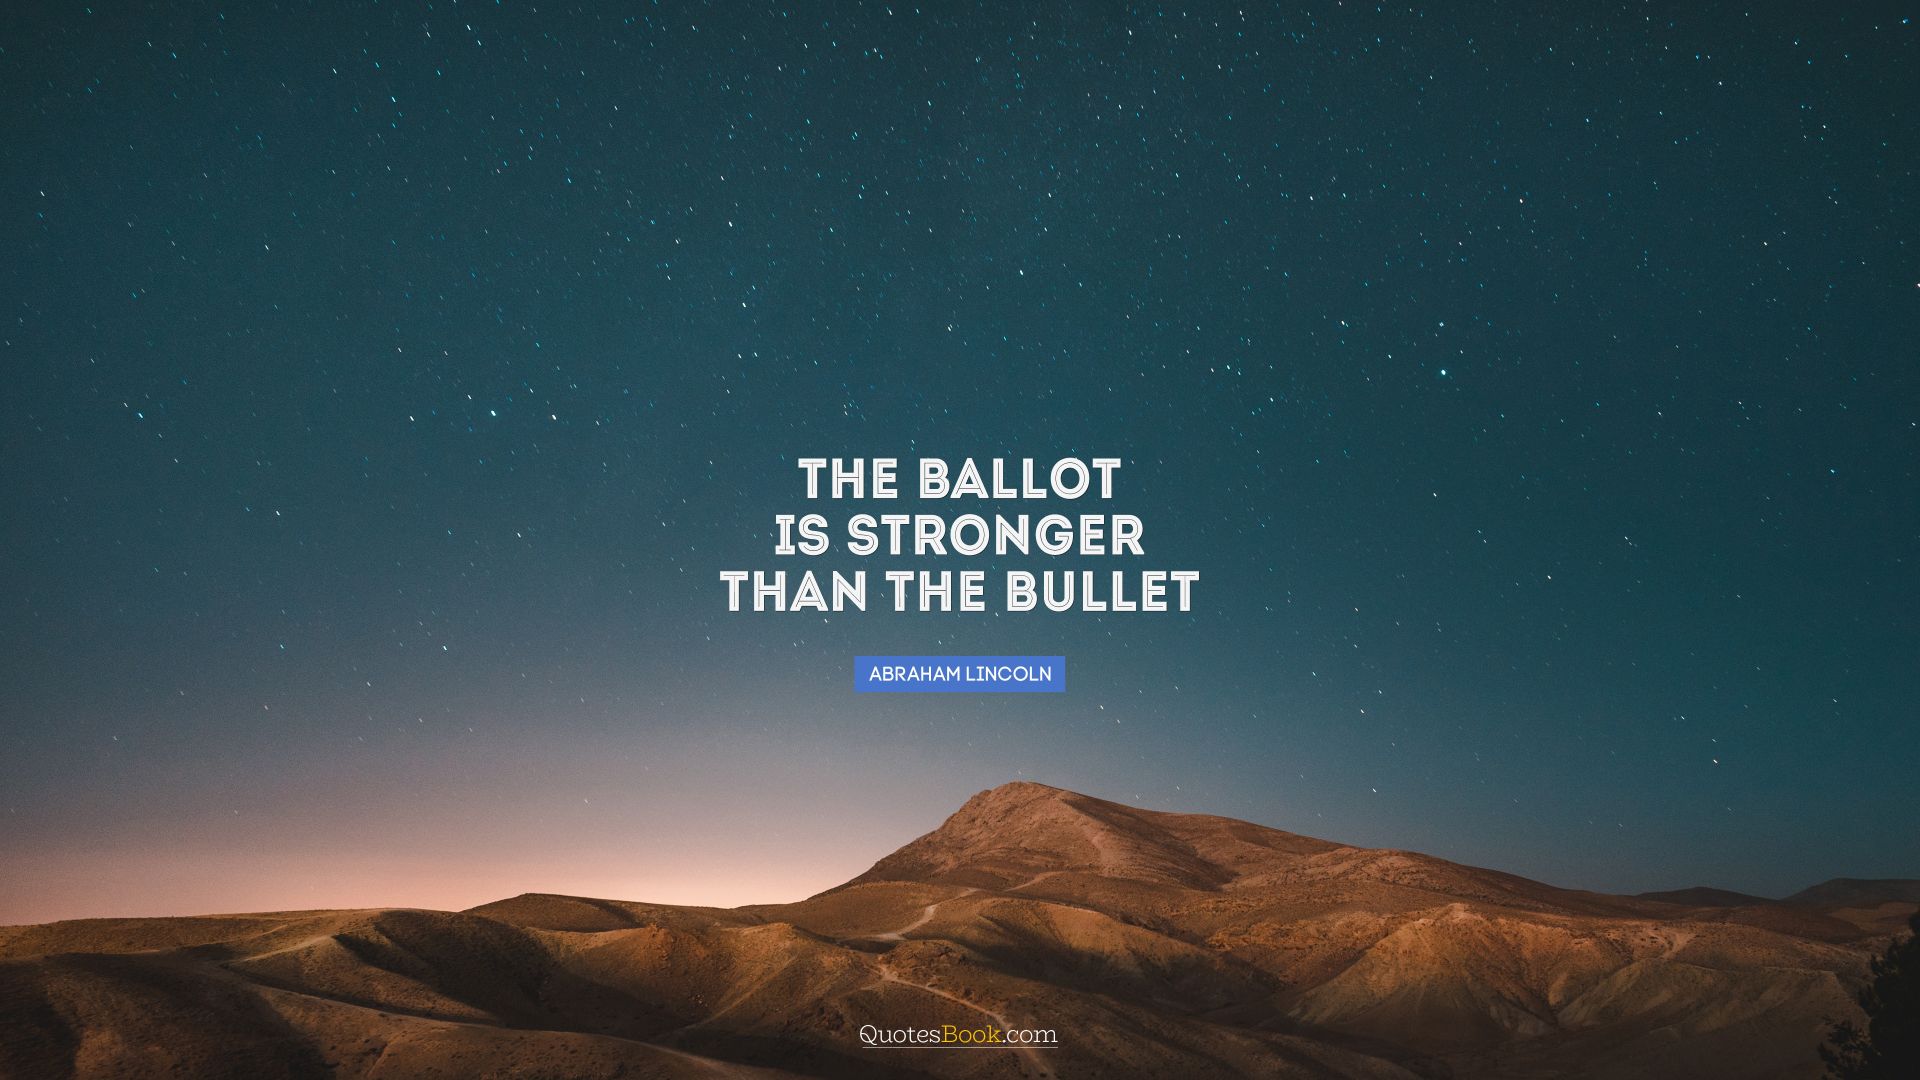 The ballot is stronger than the bullet. - Quote by Abraham Lincoln